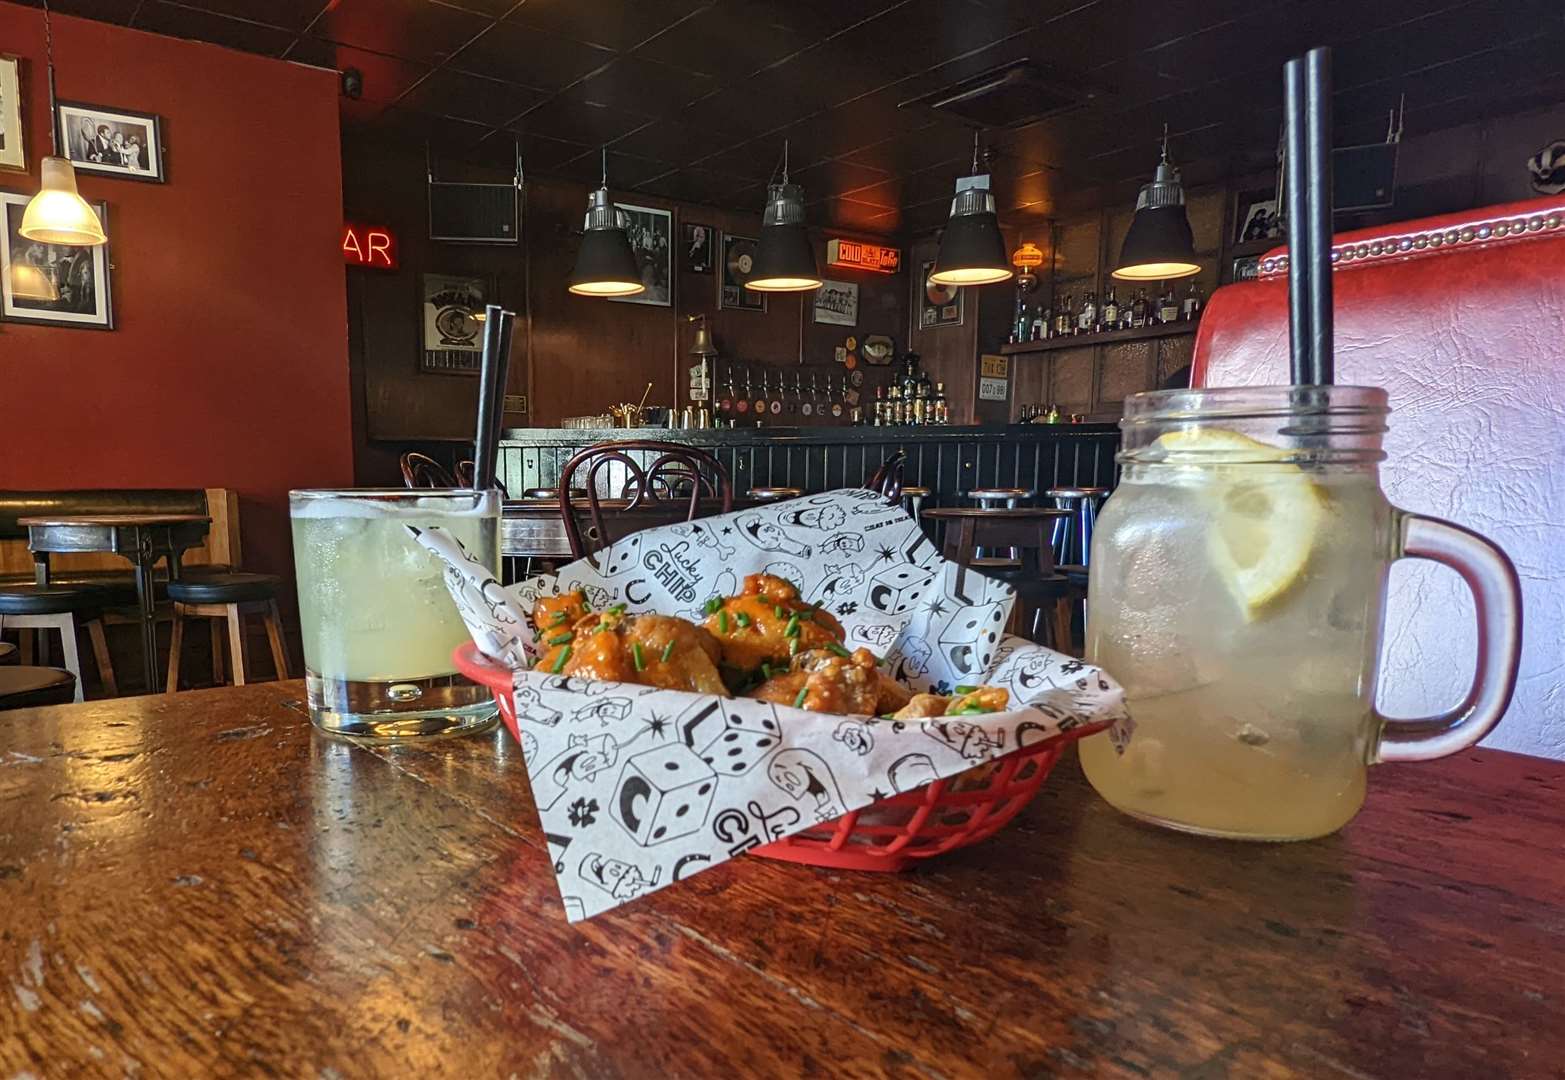 We started with cocktails and a portion of Buffalo hot wings